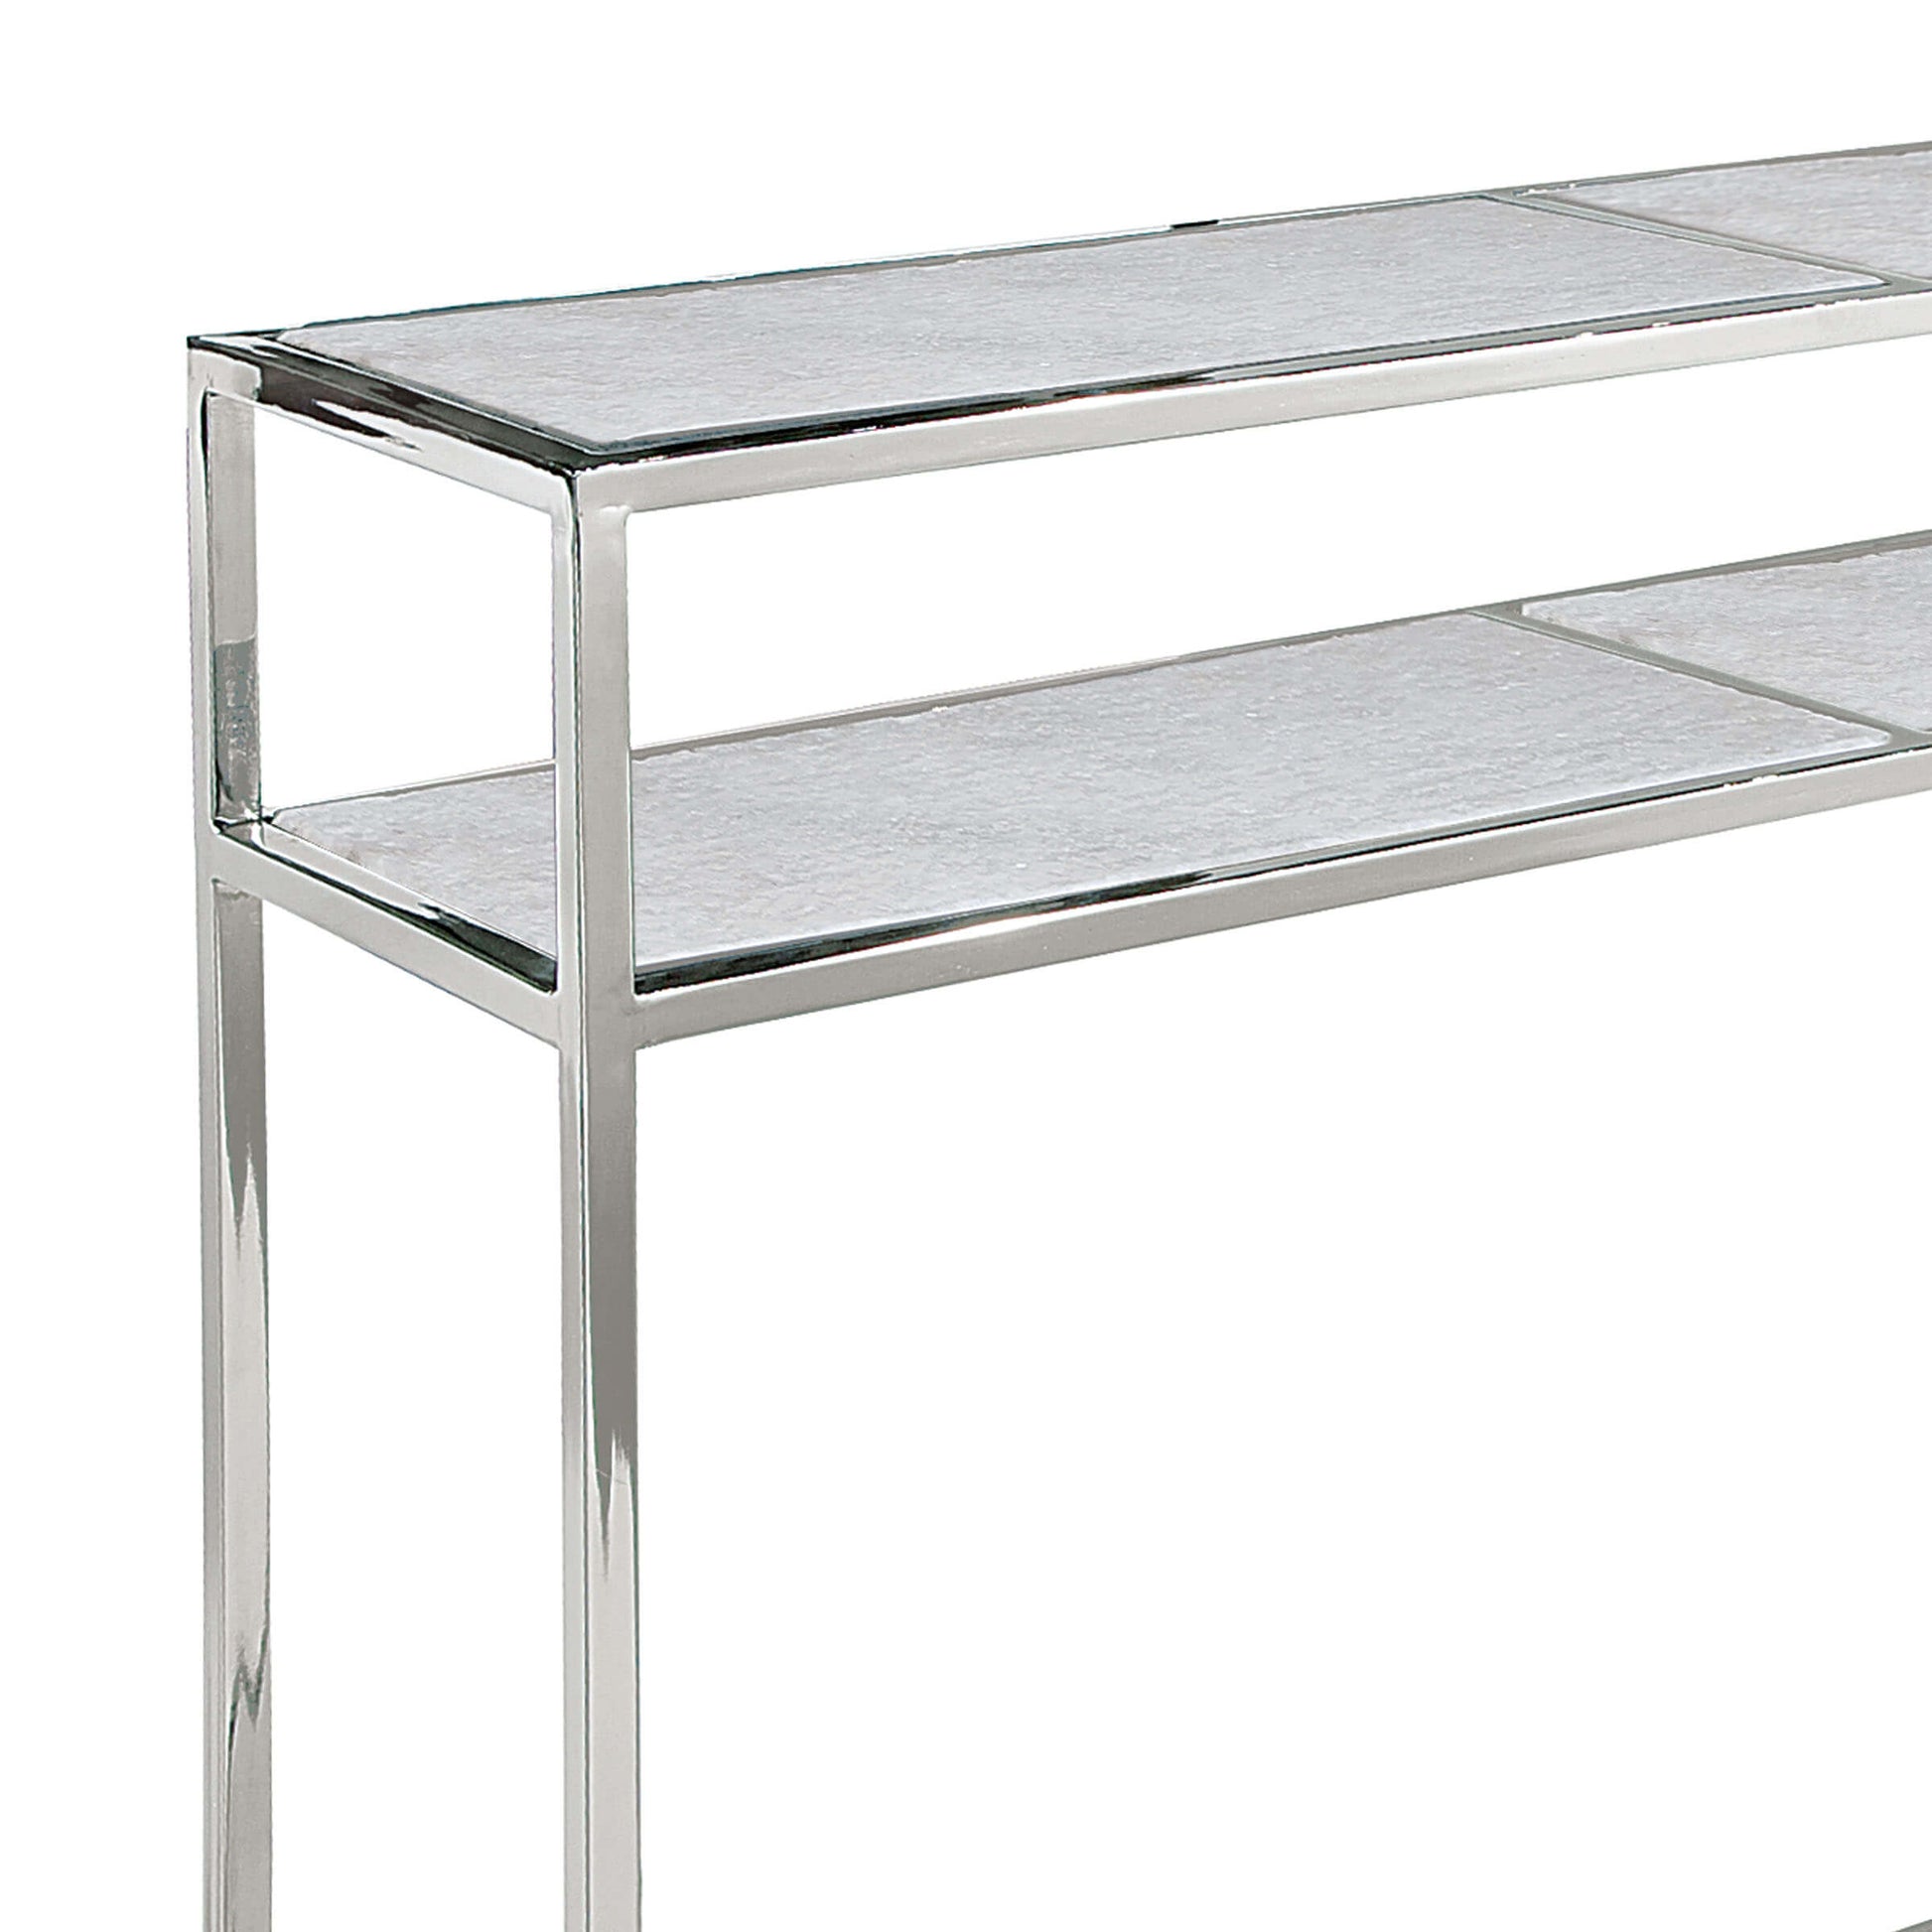 Regina Andrew Echelon Console Table in Polished Nickel